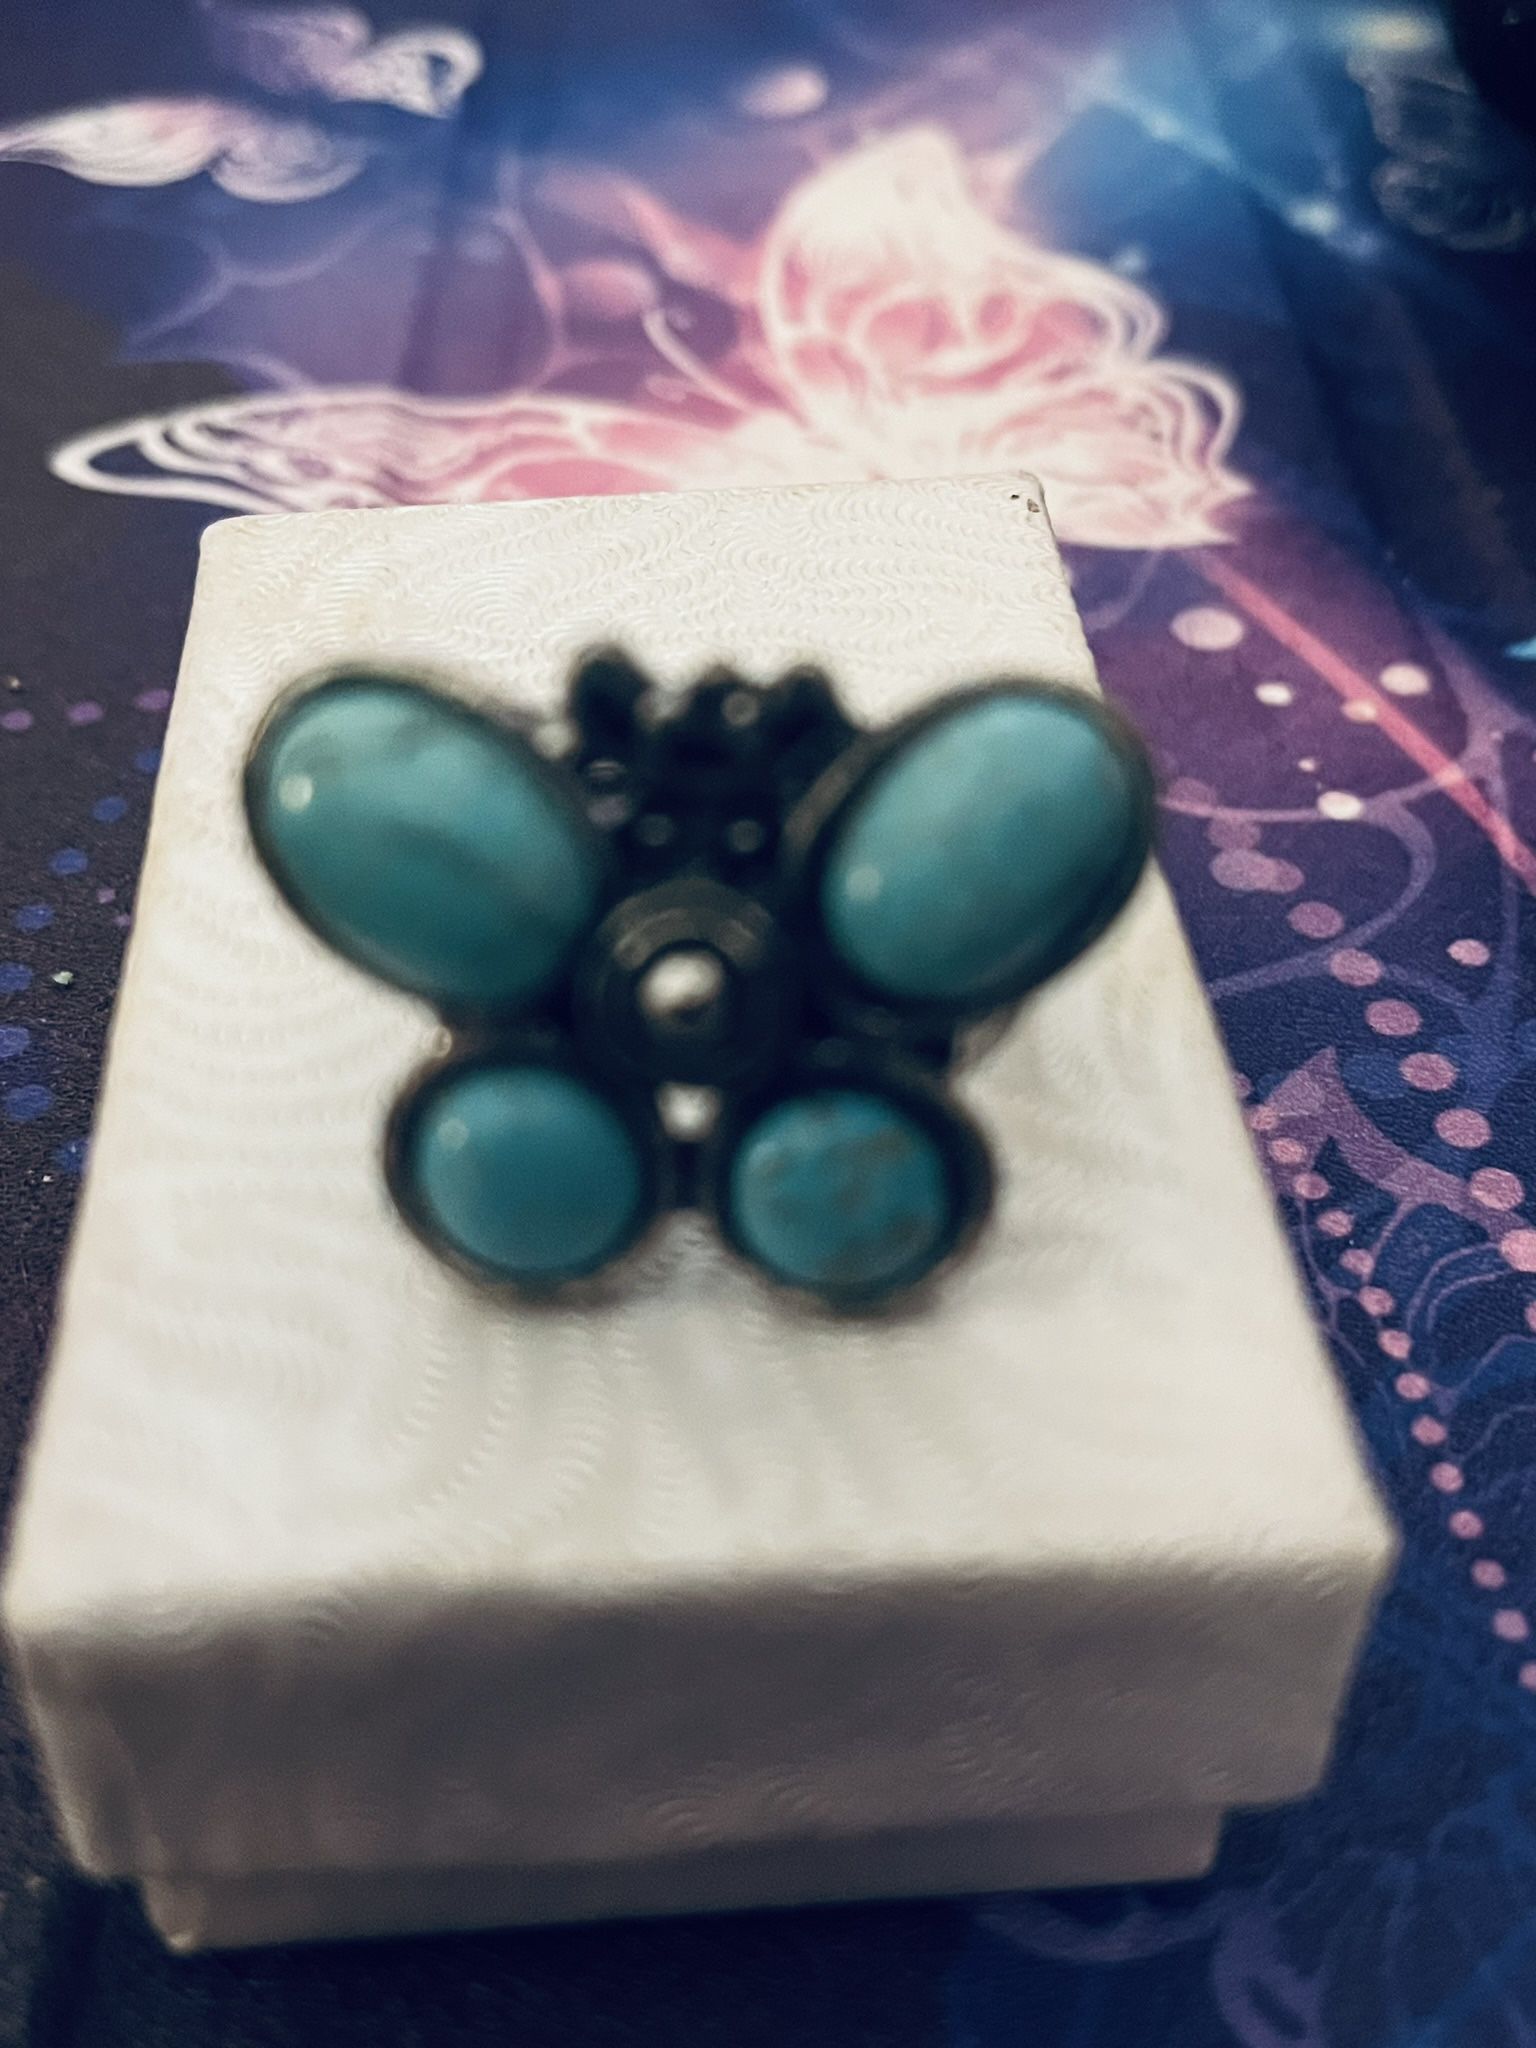 turquoise’s butterfly ring 9